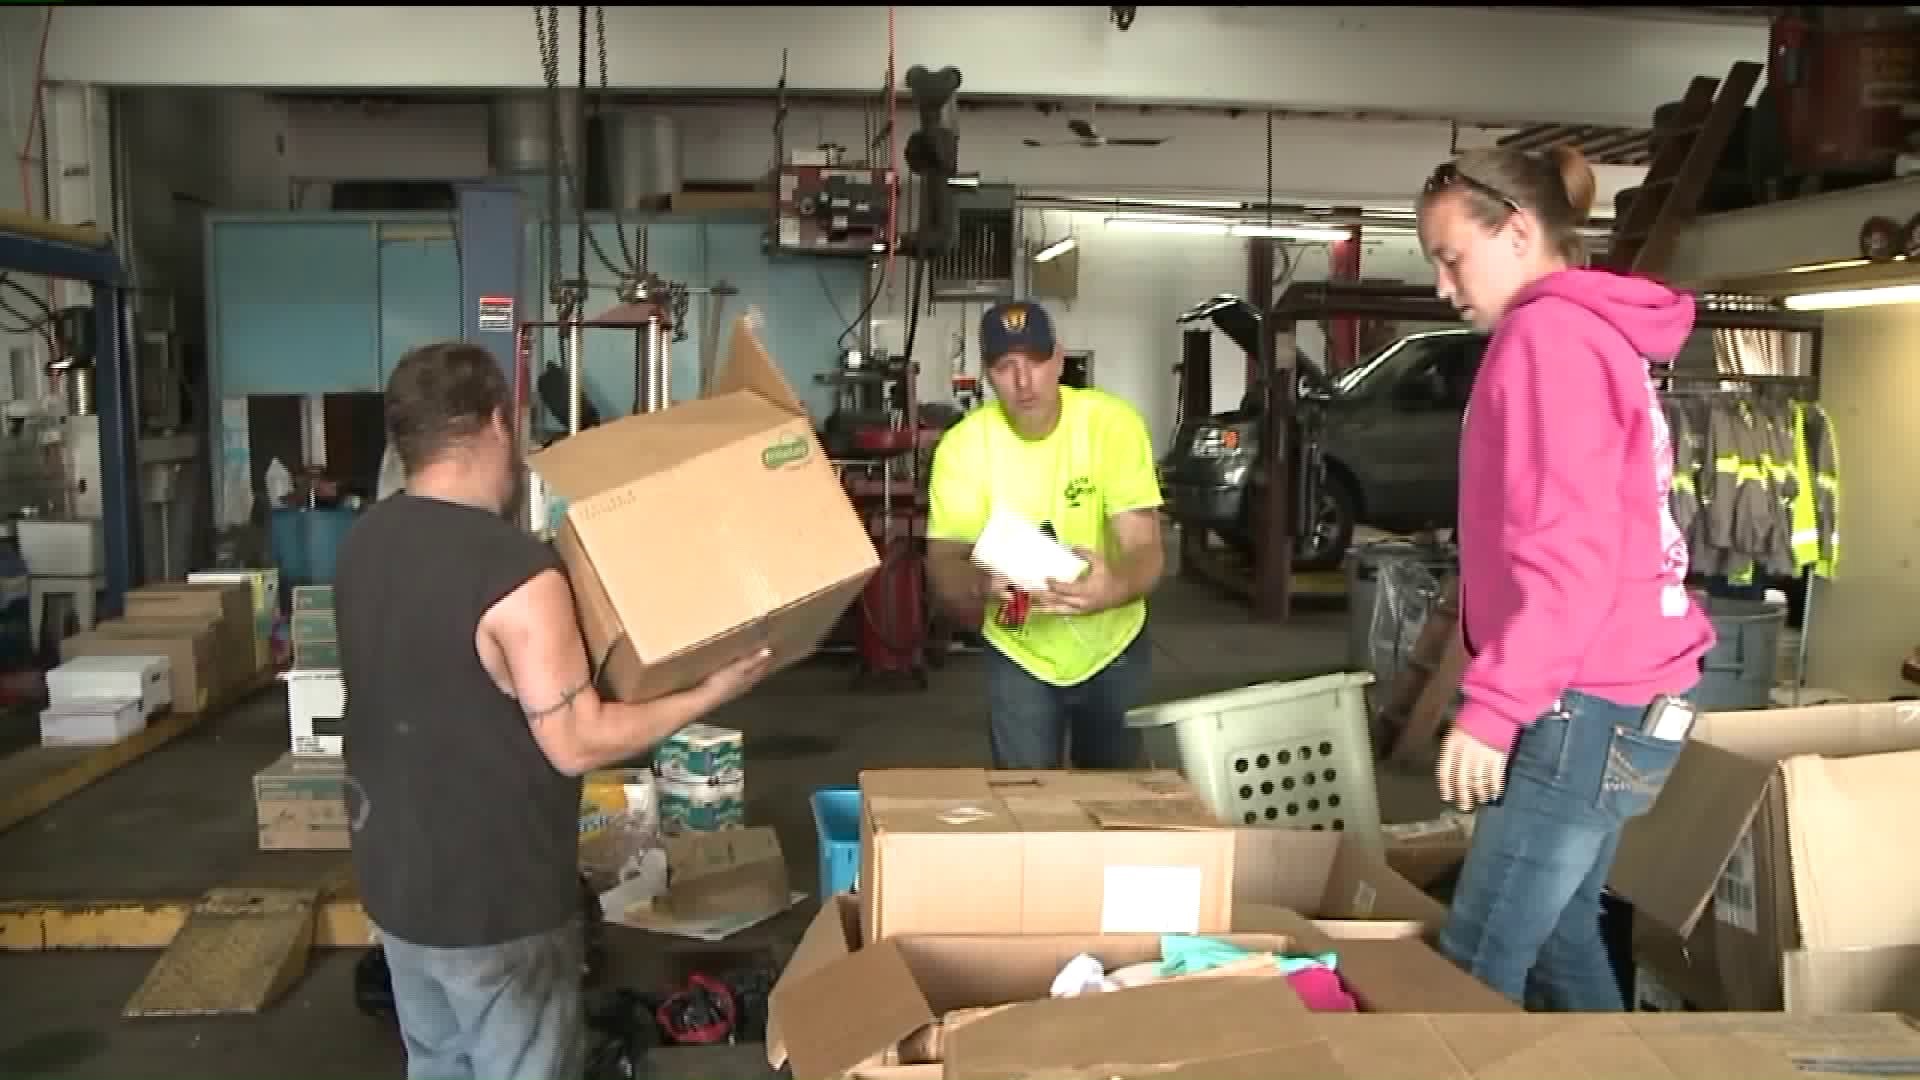 Garage Owner, Employees Gear Up to Head Down to Texas to Deliver Donations